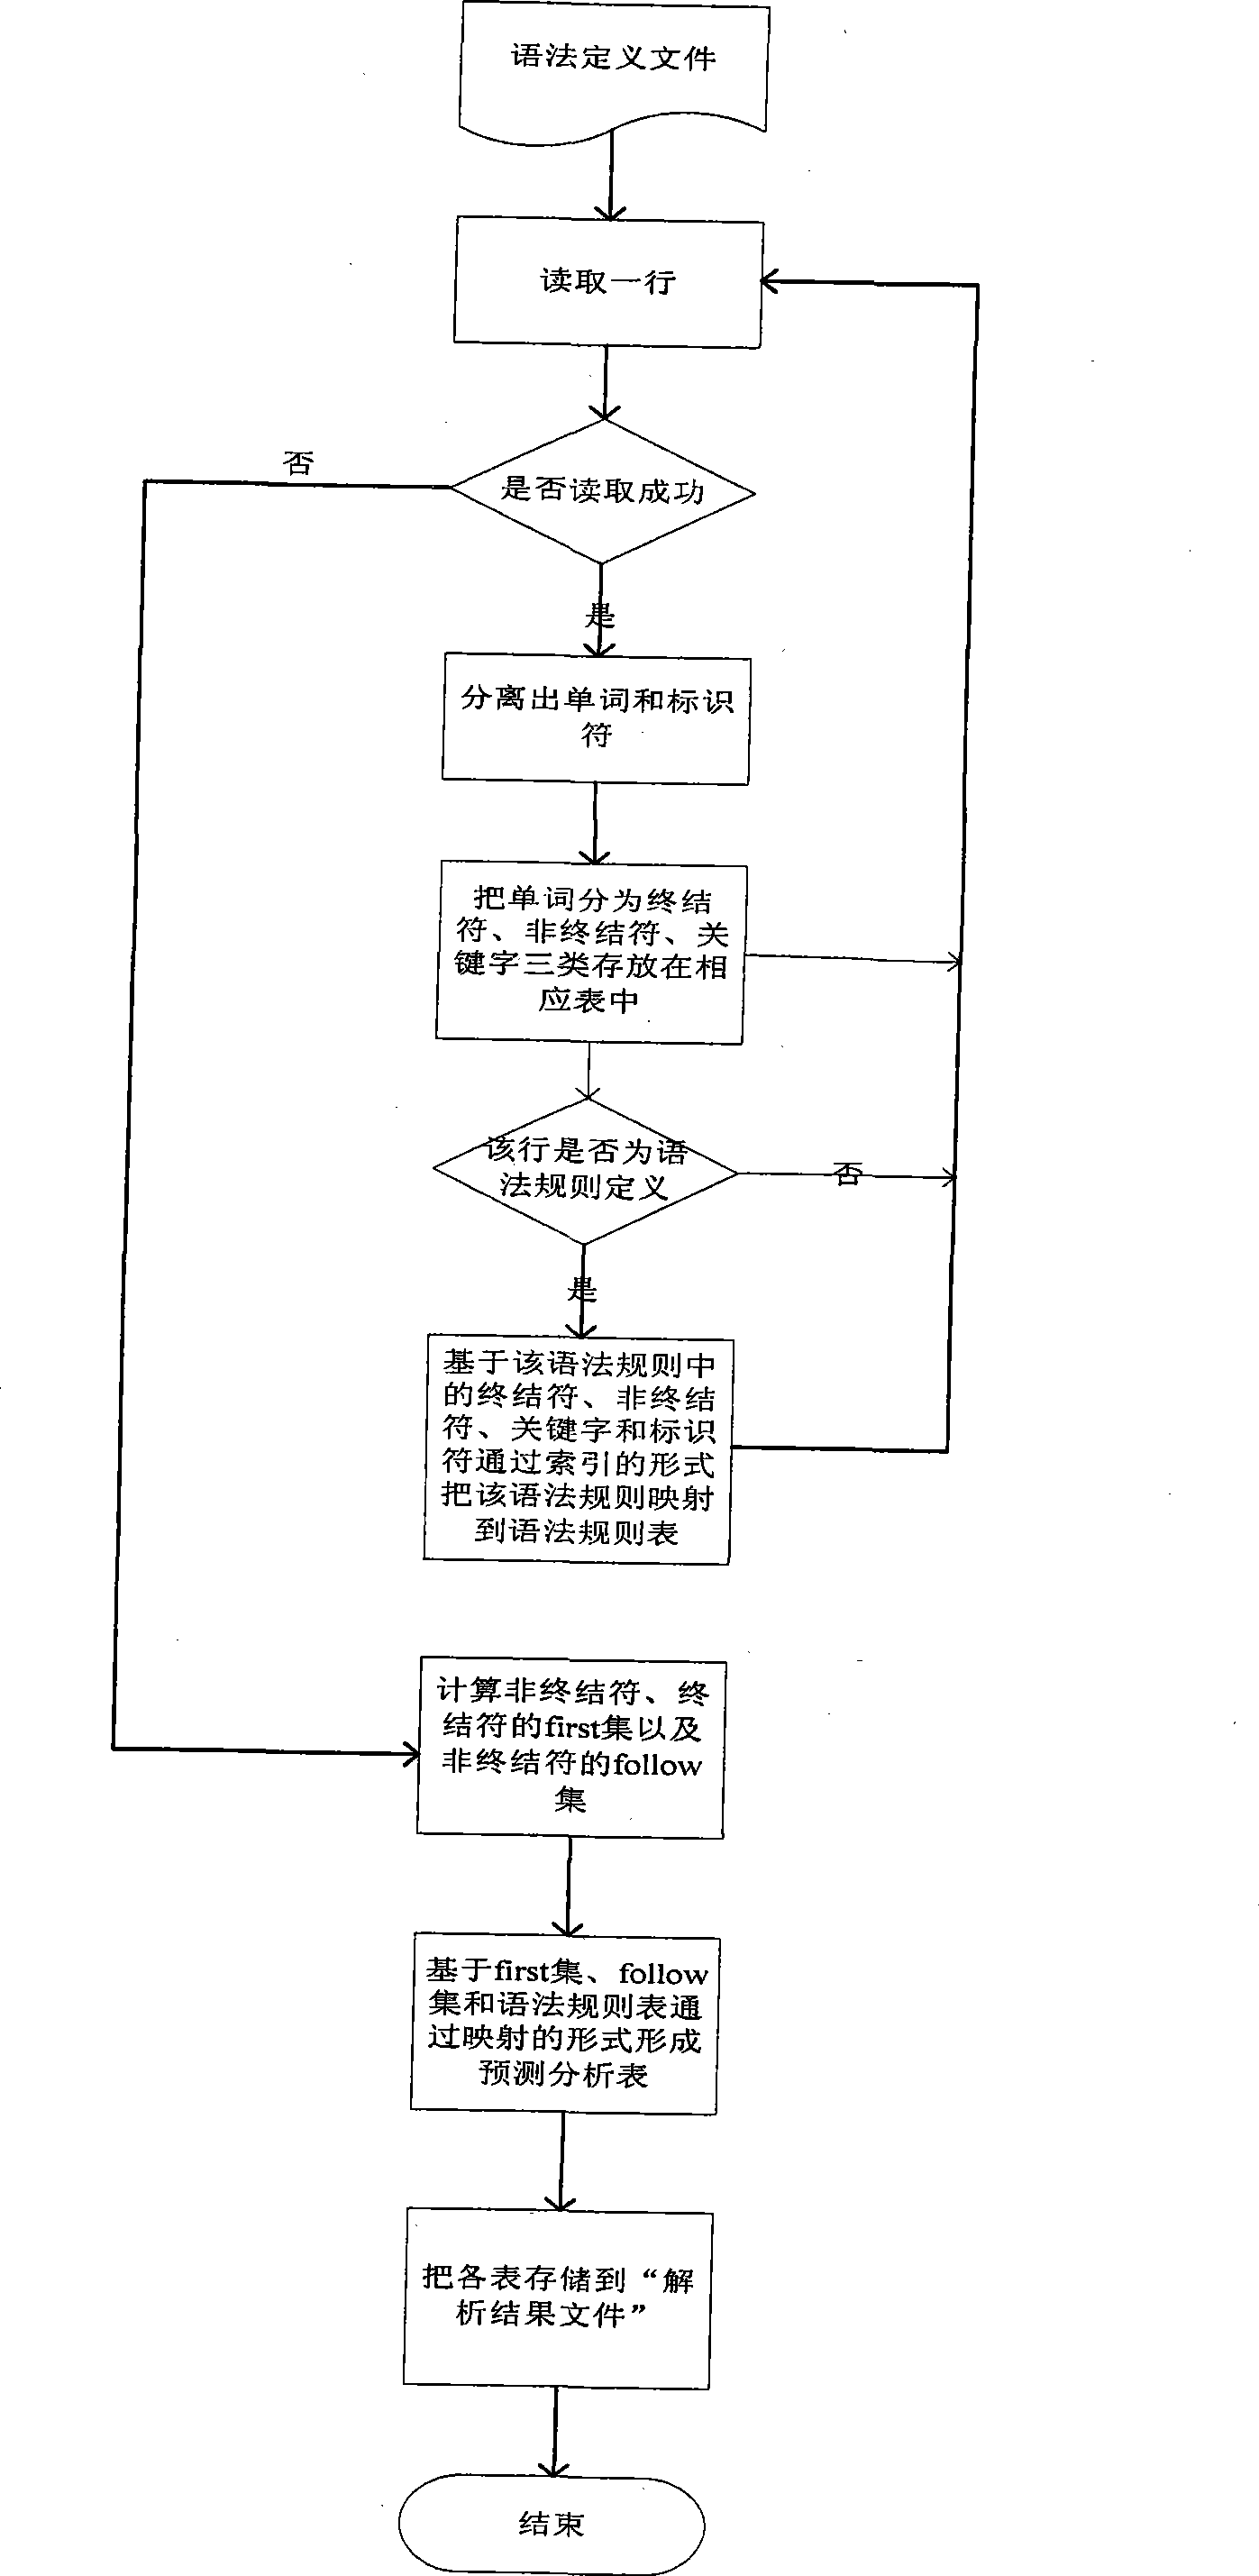 Three-dimensional object control oriented script language system and control method